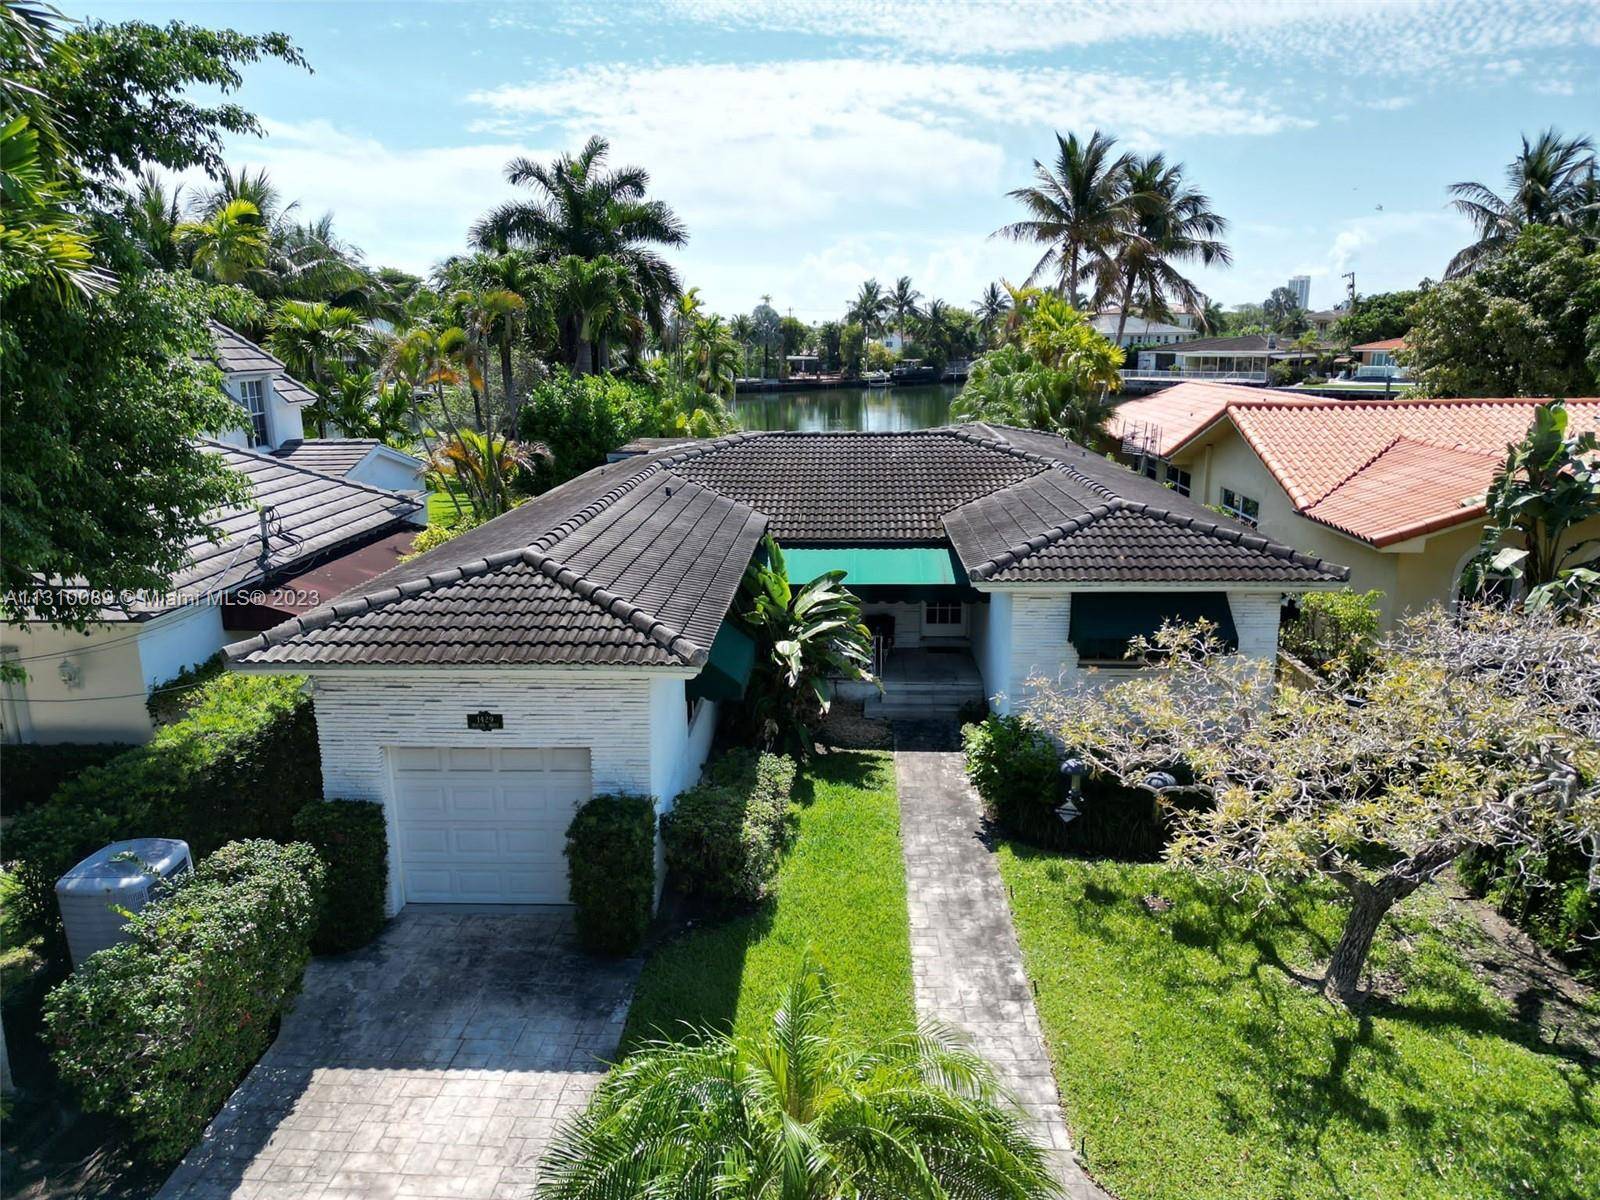 Repriced ! ! ! Rare Opportunity on Isle of Biscaya in Surfside 8, 000 SF lot with 50 LF of waterfront pool.